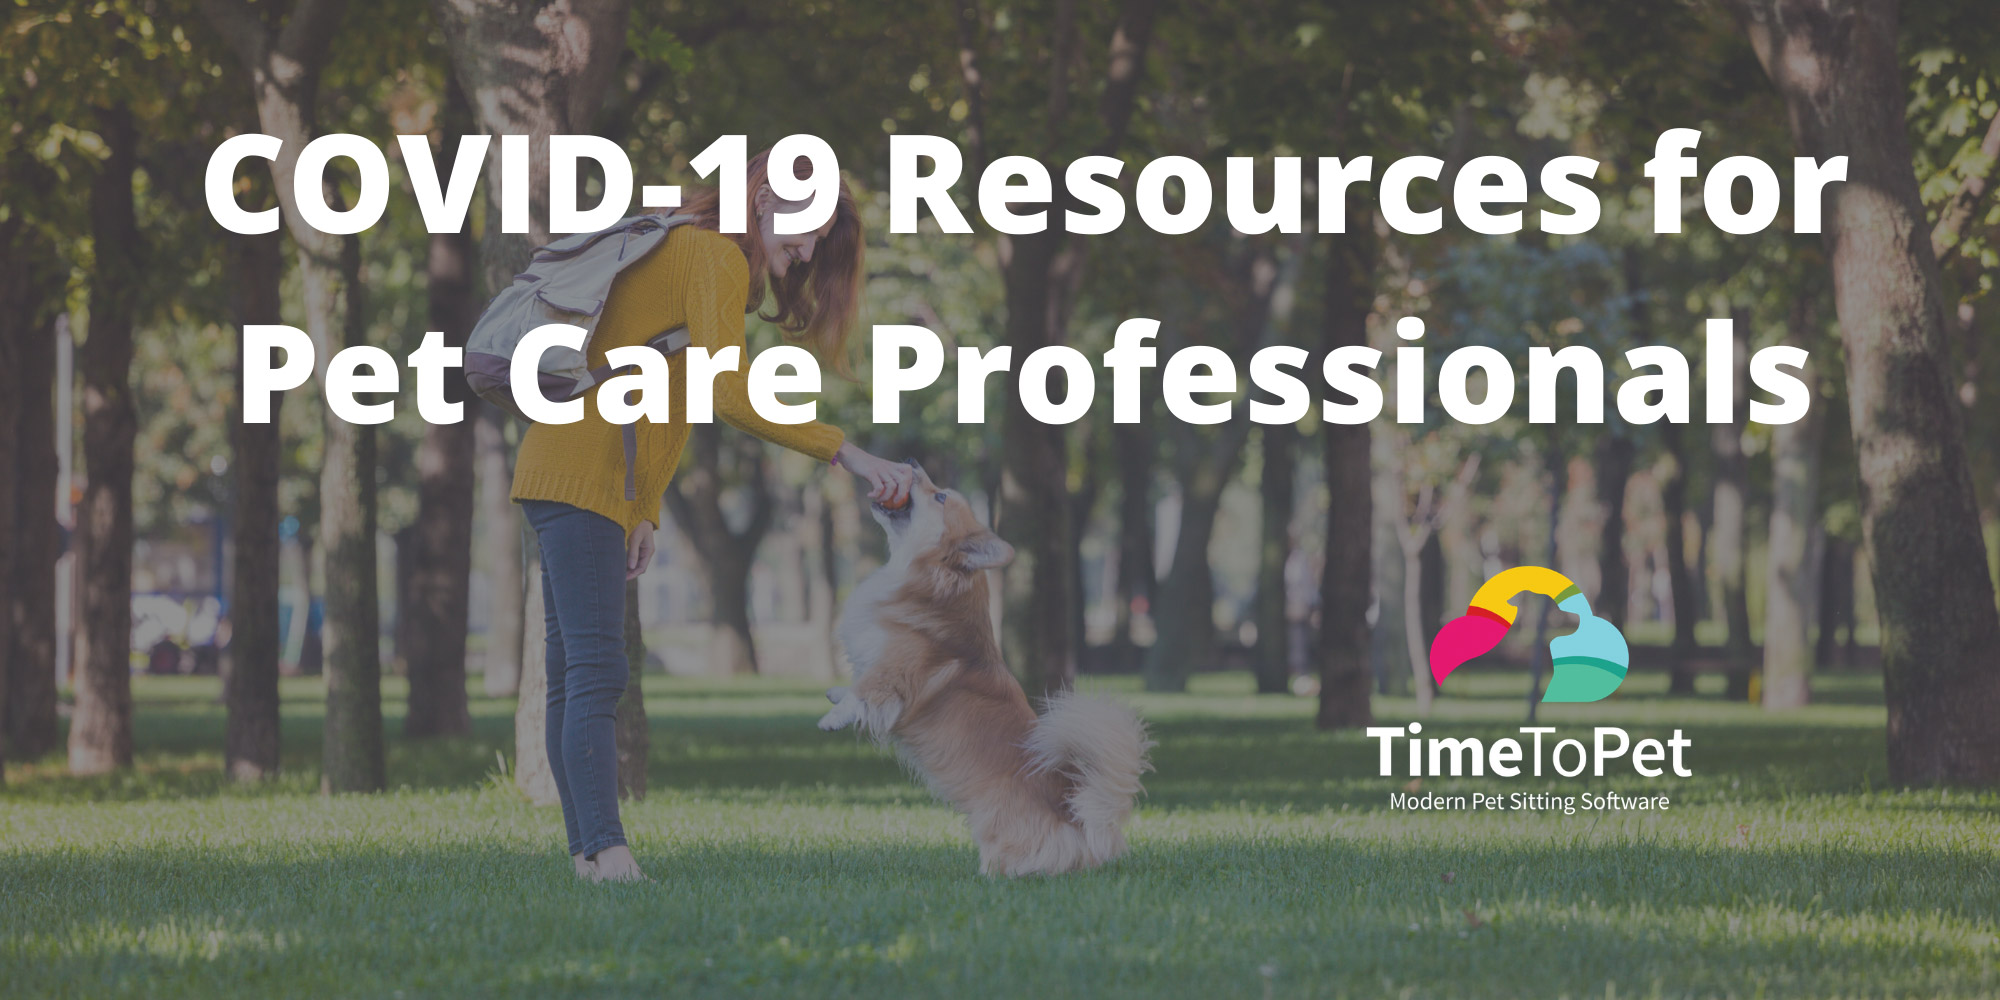 COVID-19-Resources-for-Pet-Care-Professionals.jpg